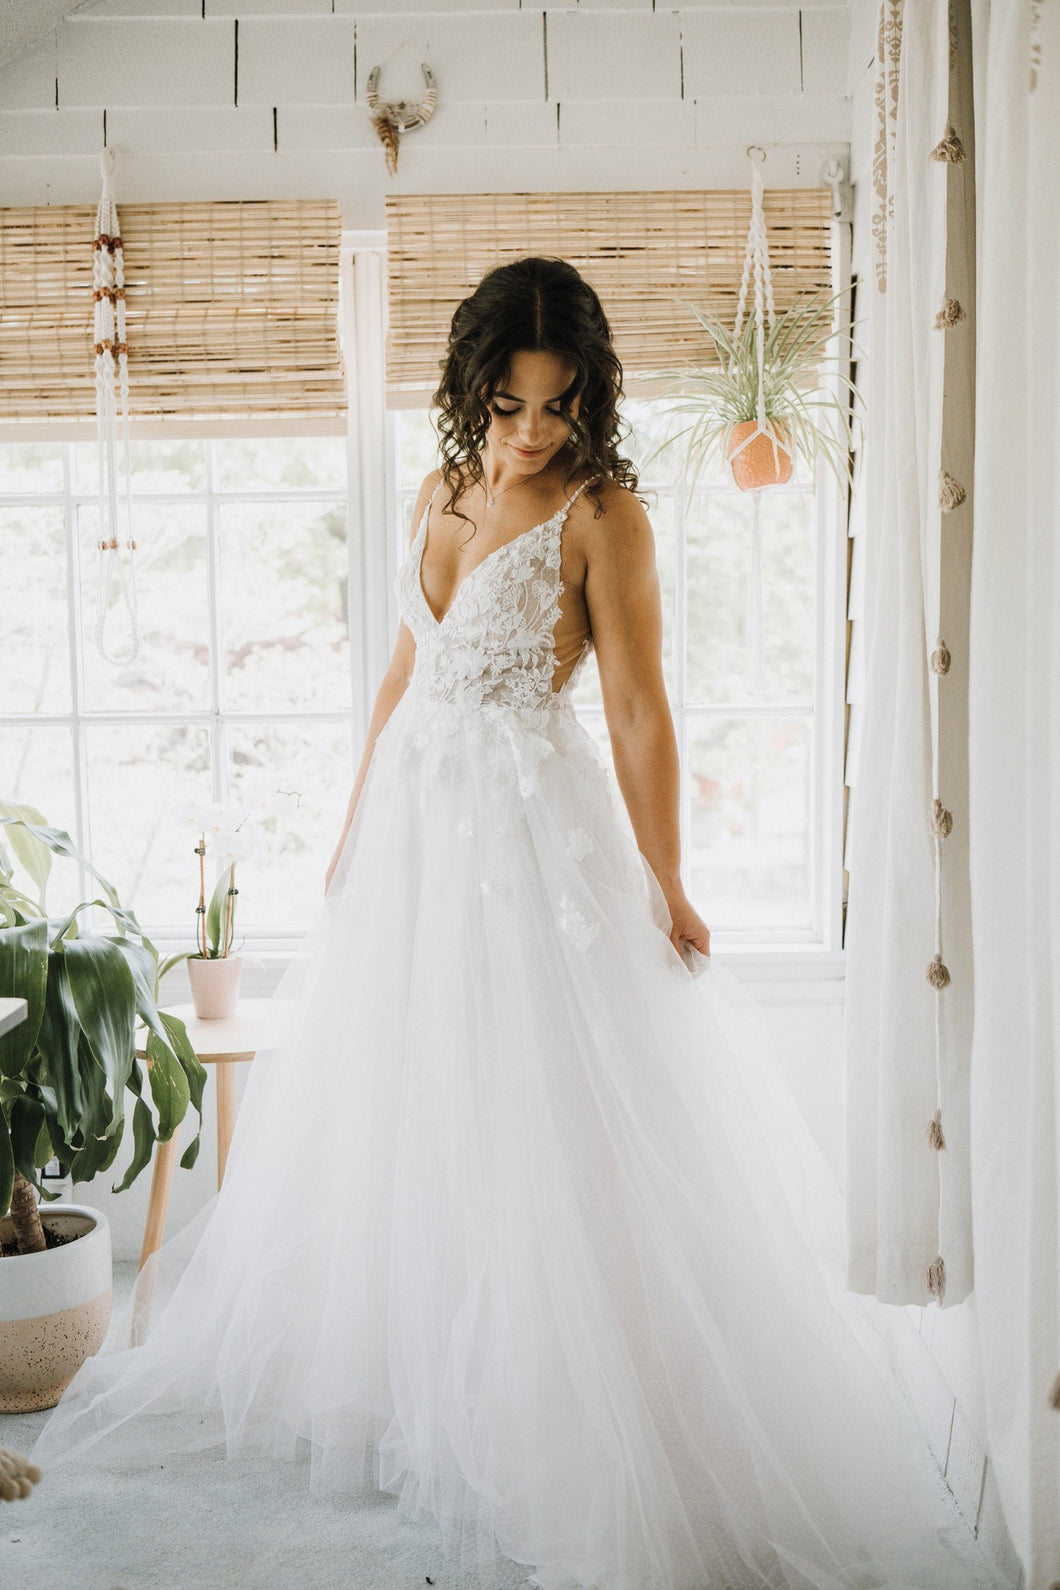 BHLDN 'Willowby by Watters Whitney Gown (Style #65371098)' wedding dress size-02 PREOWNED